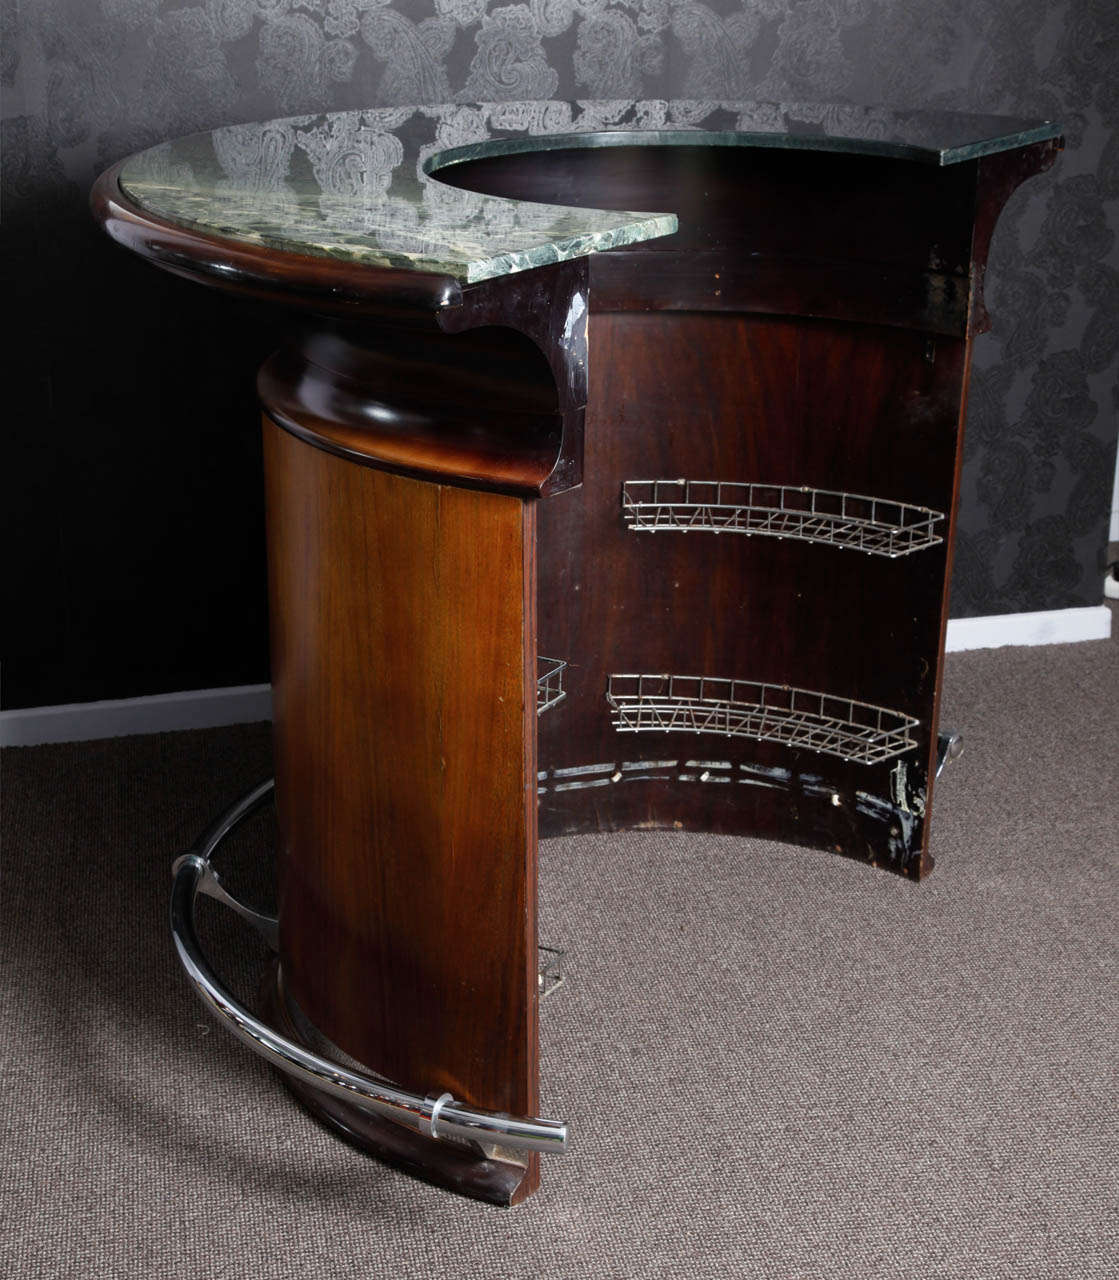 1930's art-deco bar ,dark rosewood veneer ,finished with hand made French polish, green colored marble top .
There is a possibility to purchase two matching bar stools, shown as well in my storefront.